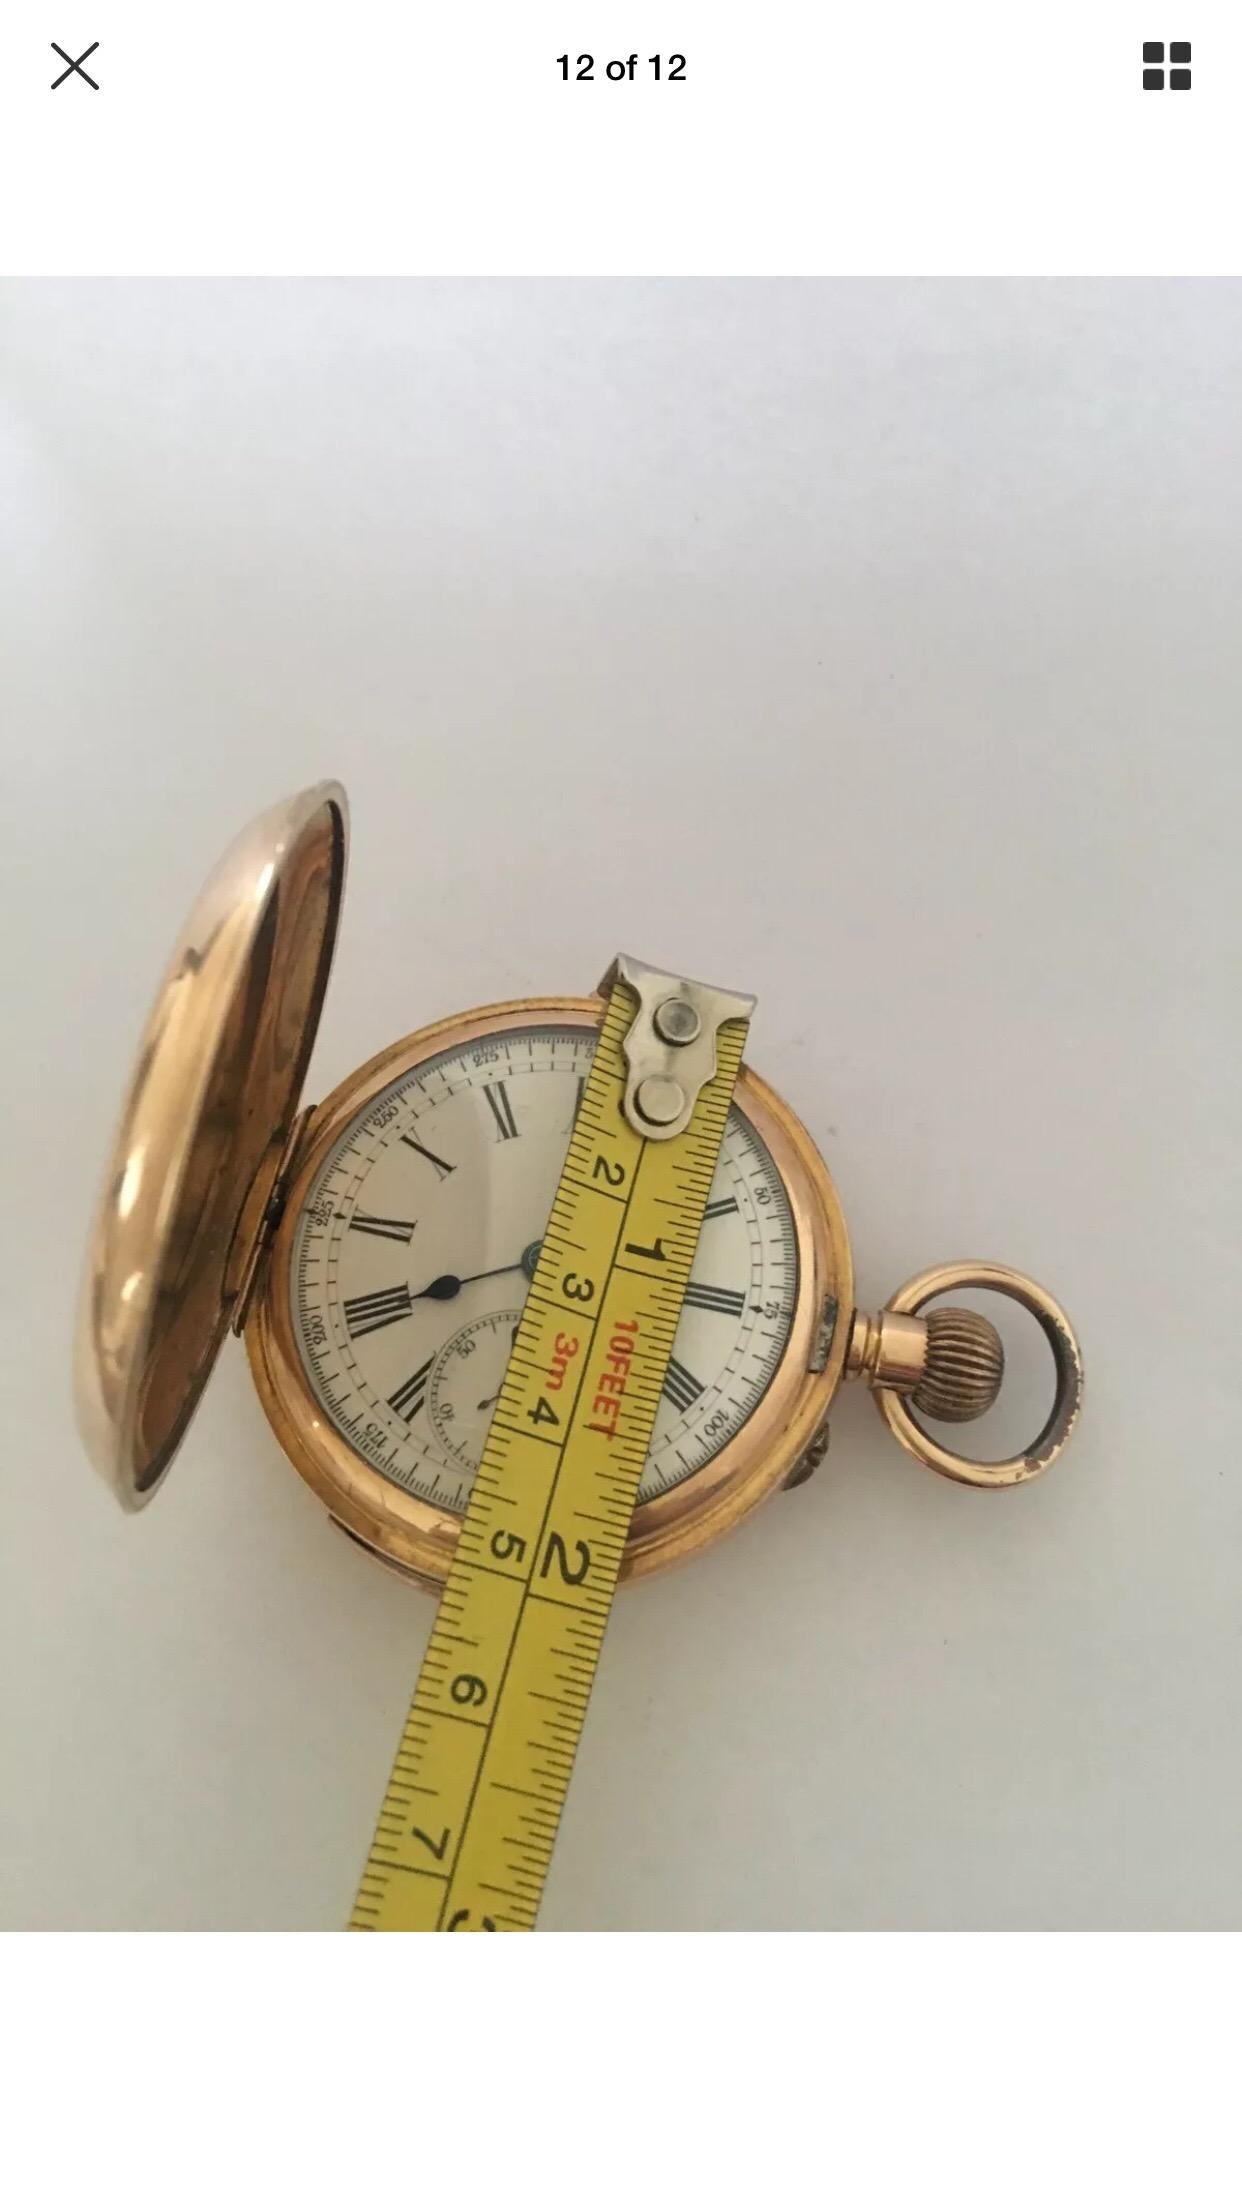 Antique Gold-Plated Quarter Repeater Chronograph Pocket Watch 6